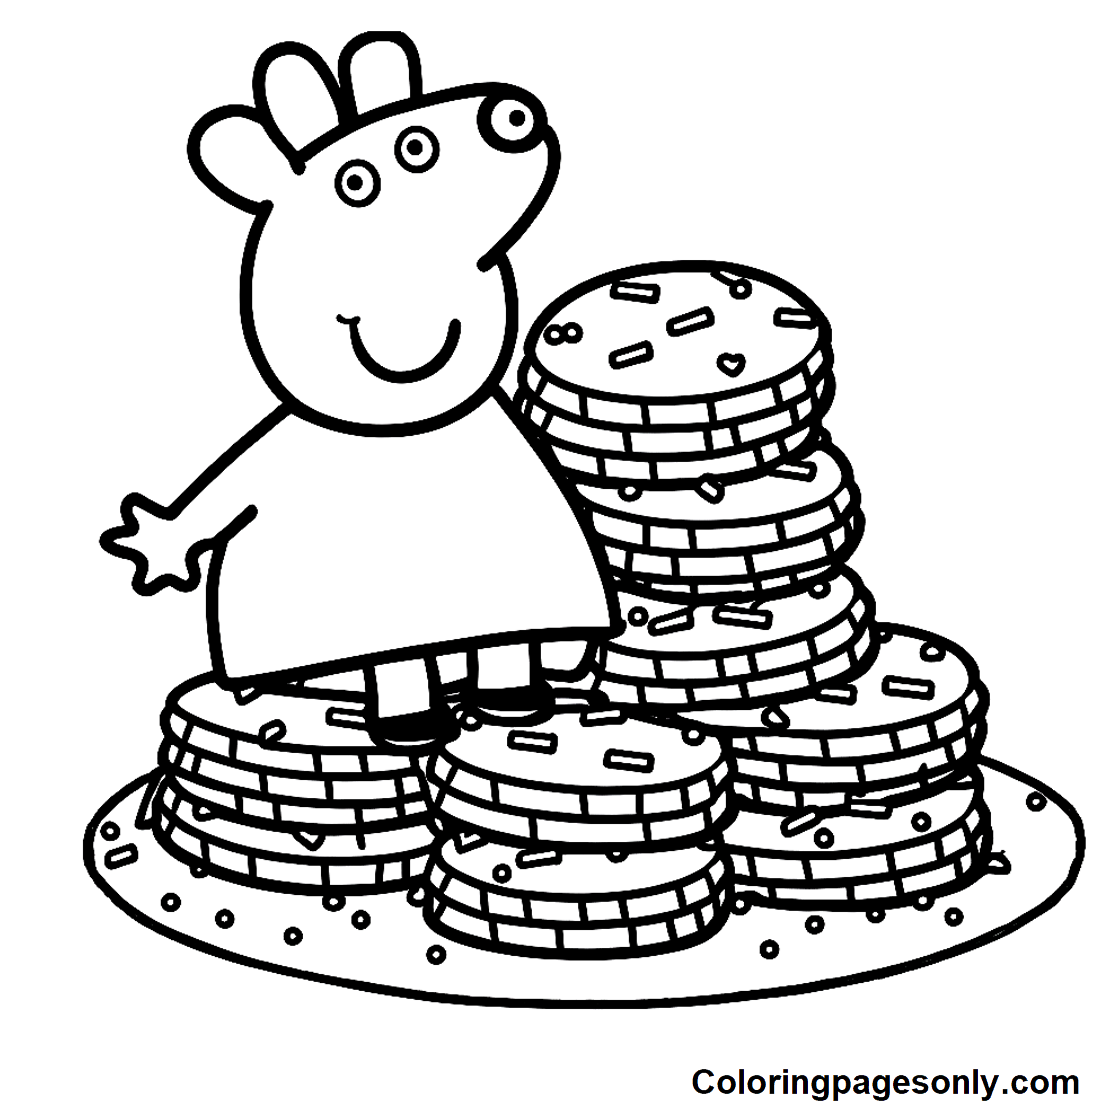 Peppa Pig with Cookies Coloring Pages